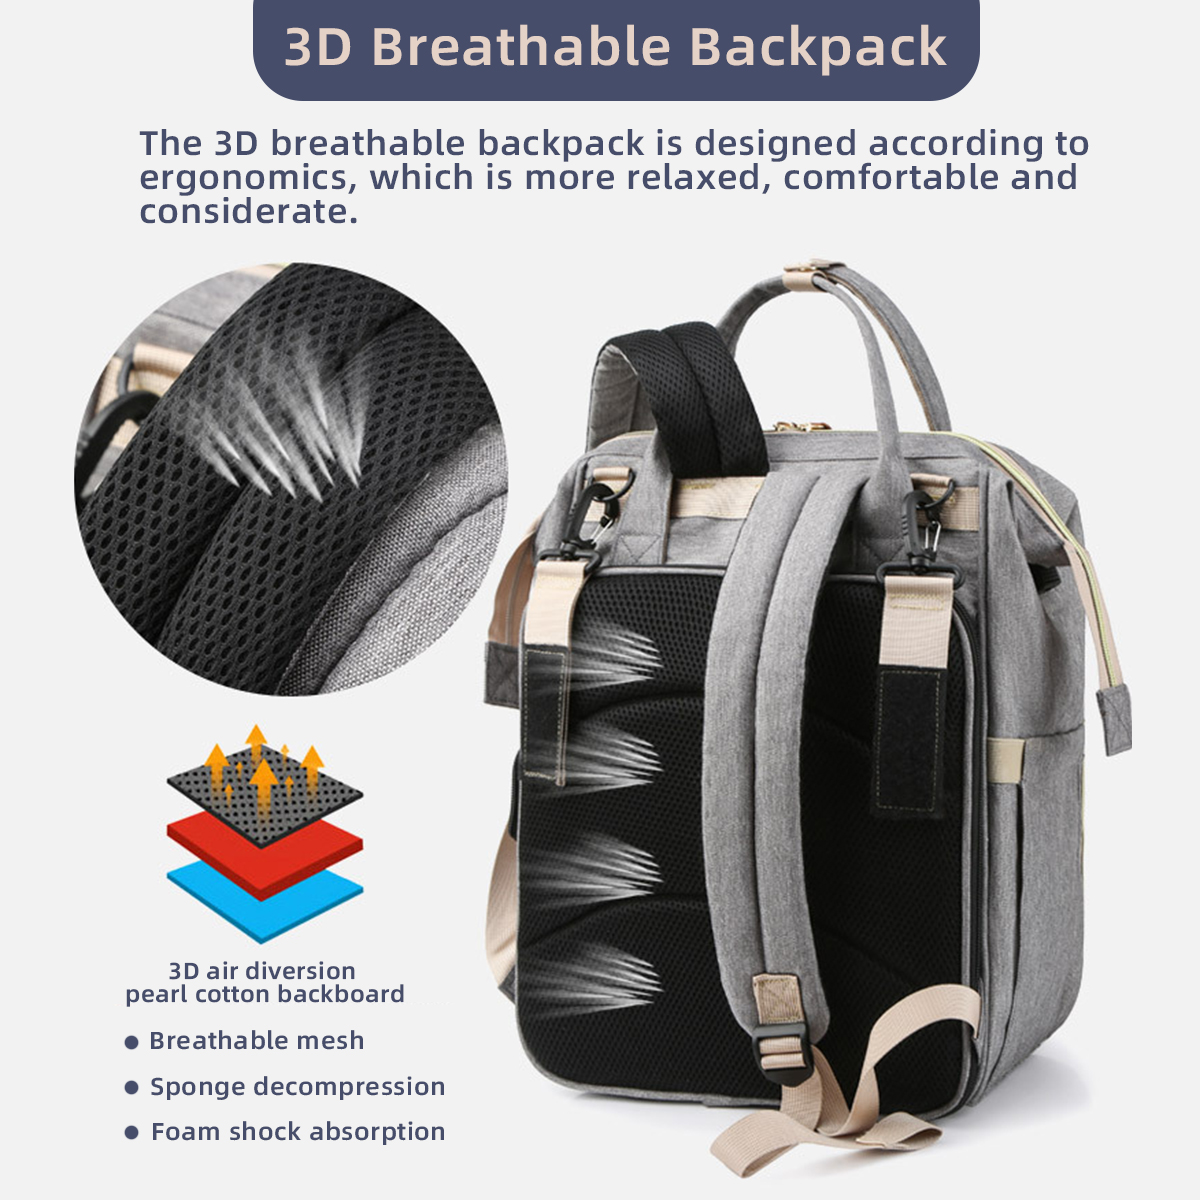 Mummy-Backpack-USB-Port-Folding-Bed-Diaper-Bag-Multifunction-Outdoor-Travel-1836767-5